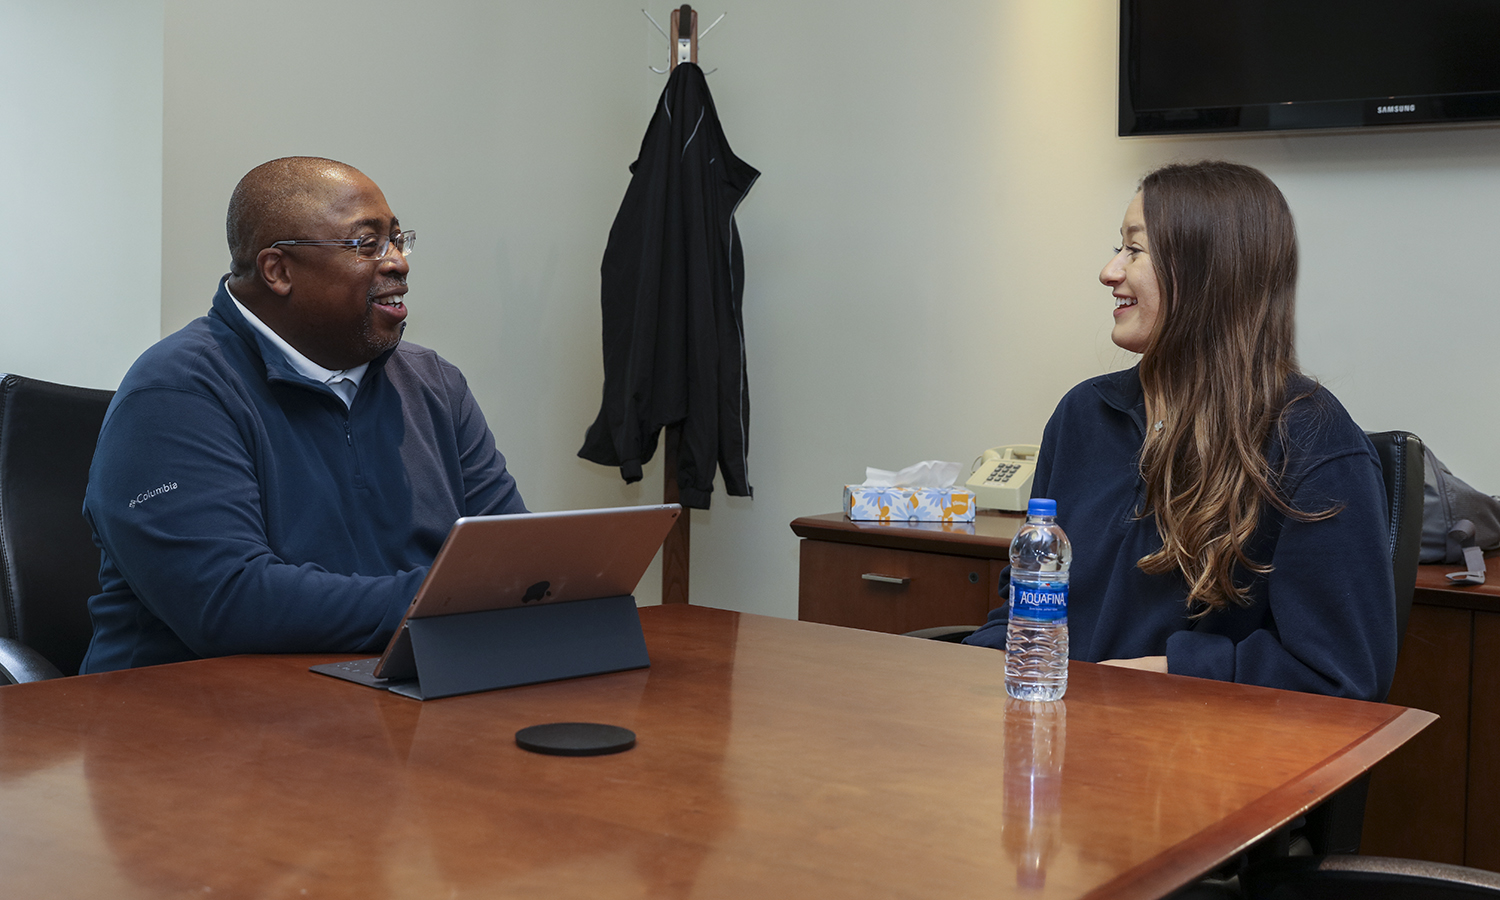  Michael Rawlins '80, P'16, Head of the Enterprise Content and Broadcast Media Design Team at The Walt Disney Company, discusses career opportunities with Caitlin Chichora '21 in the Salisbury Center for Career, Professional and Experiential Education.